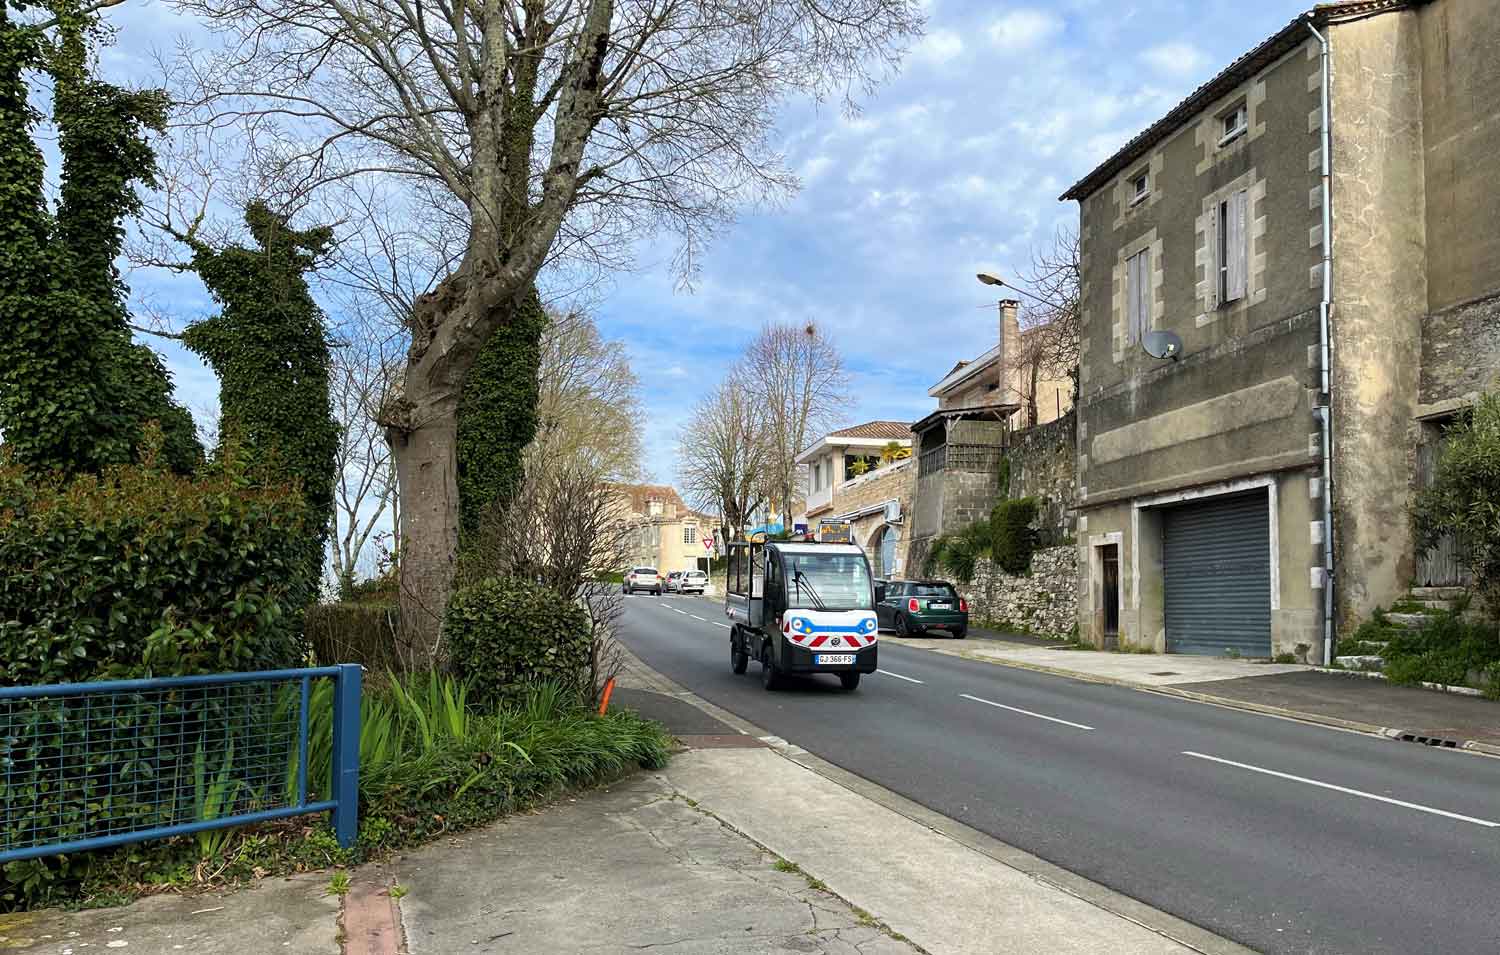 Goupil G4 driving through a residential area